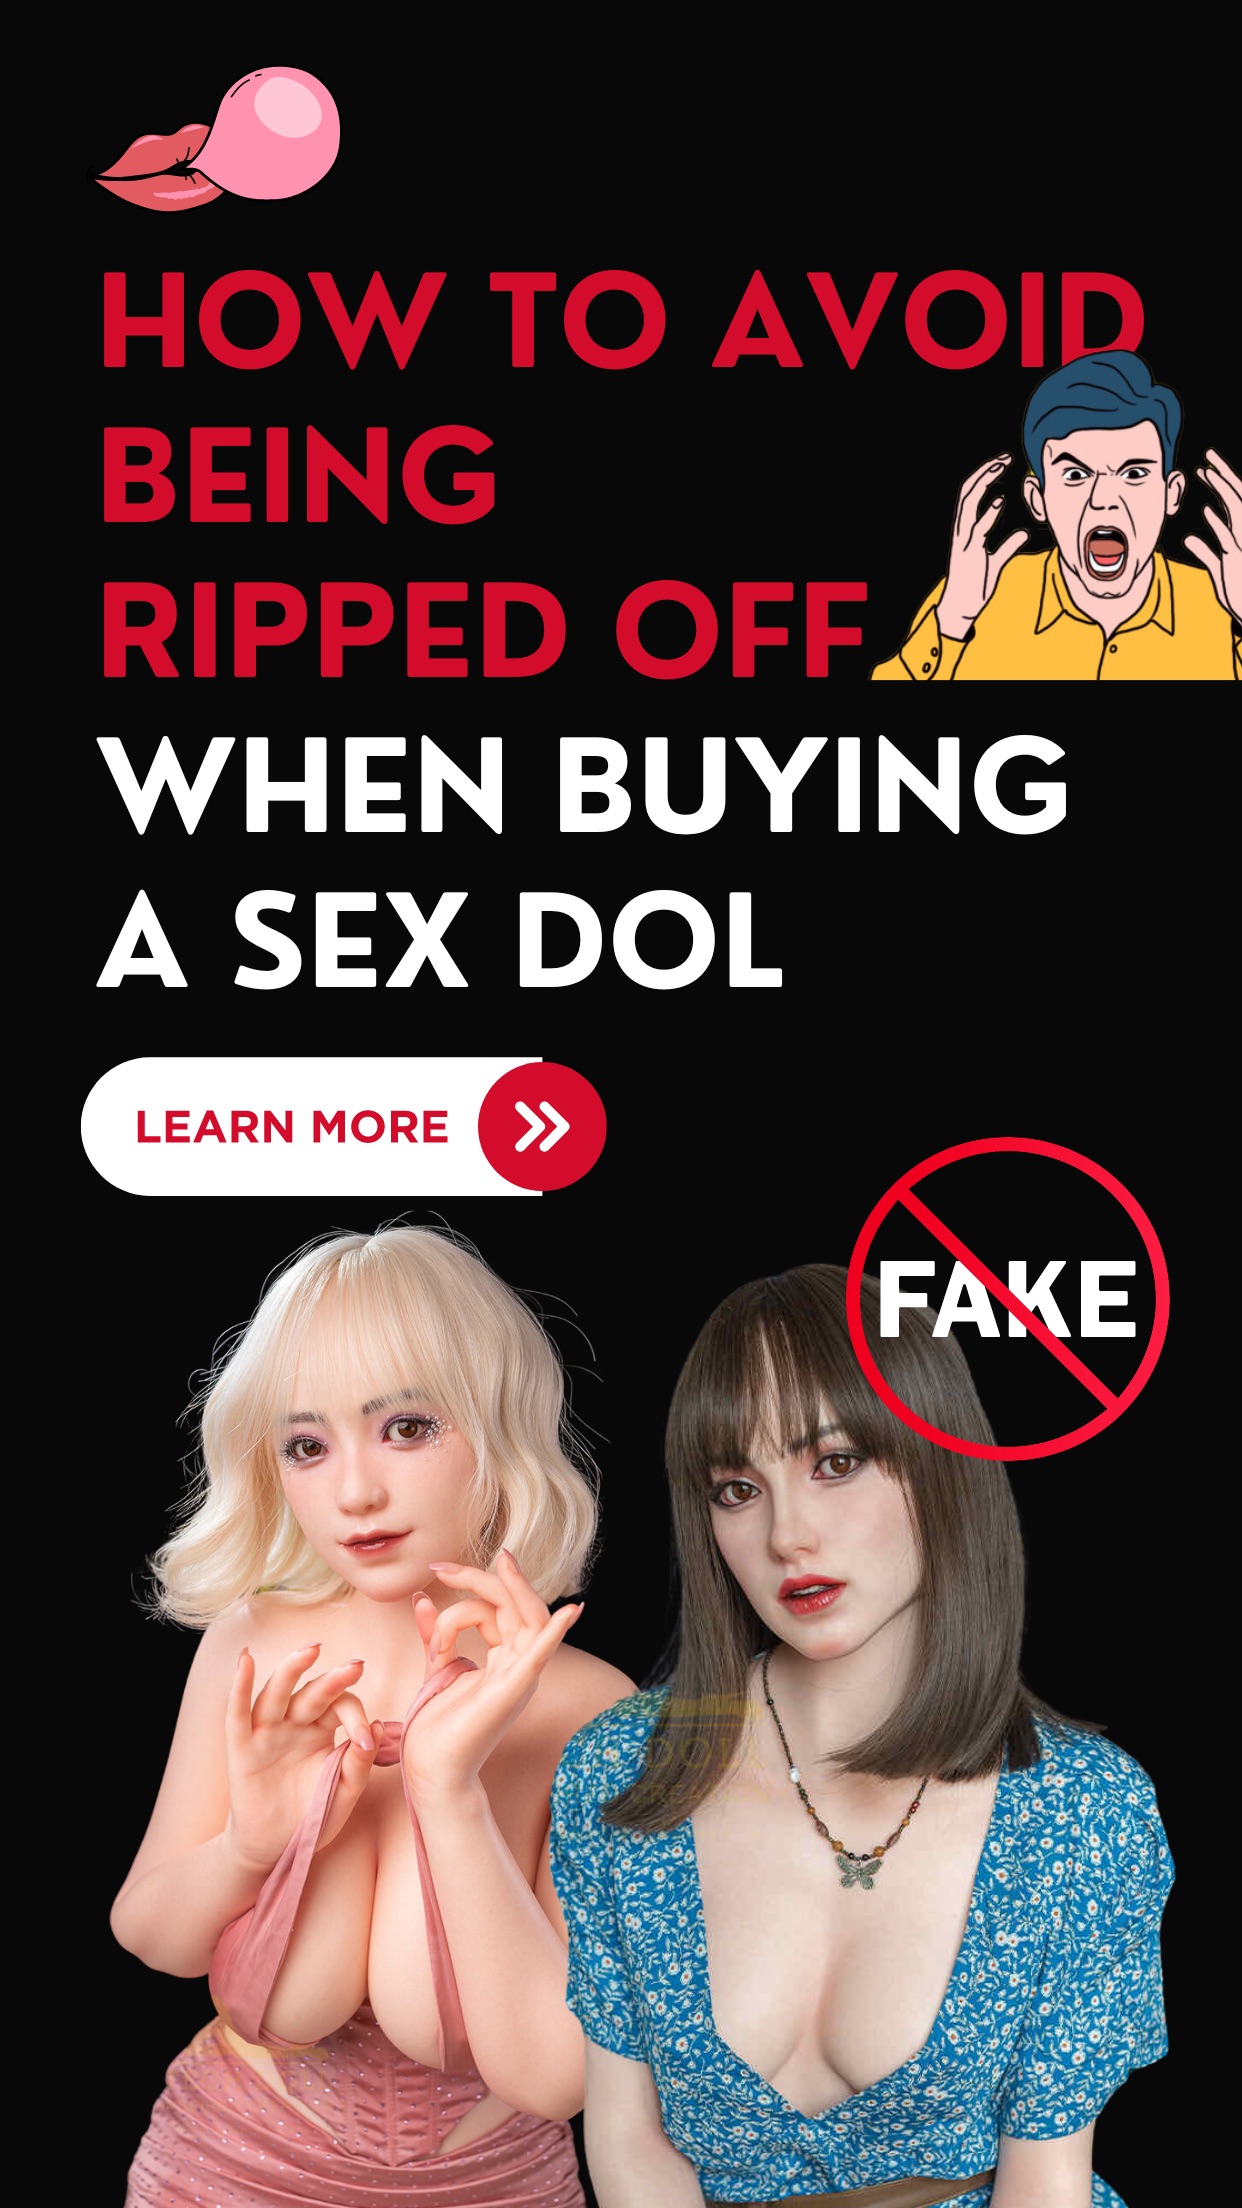 How To Avoid Being Ripped Off When Buying A Sex Doll